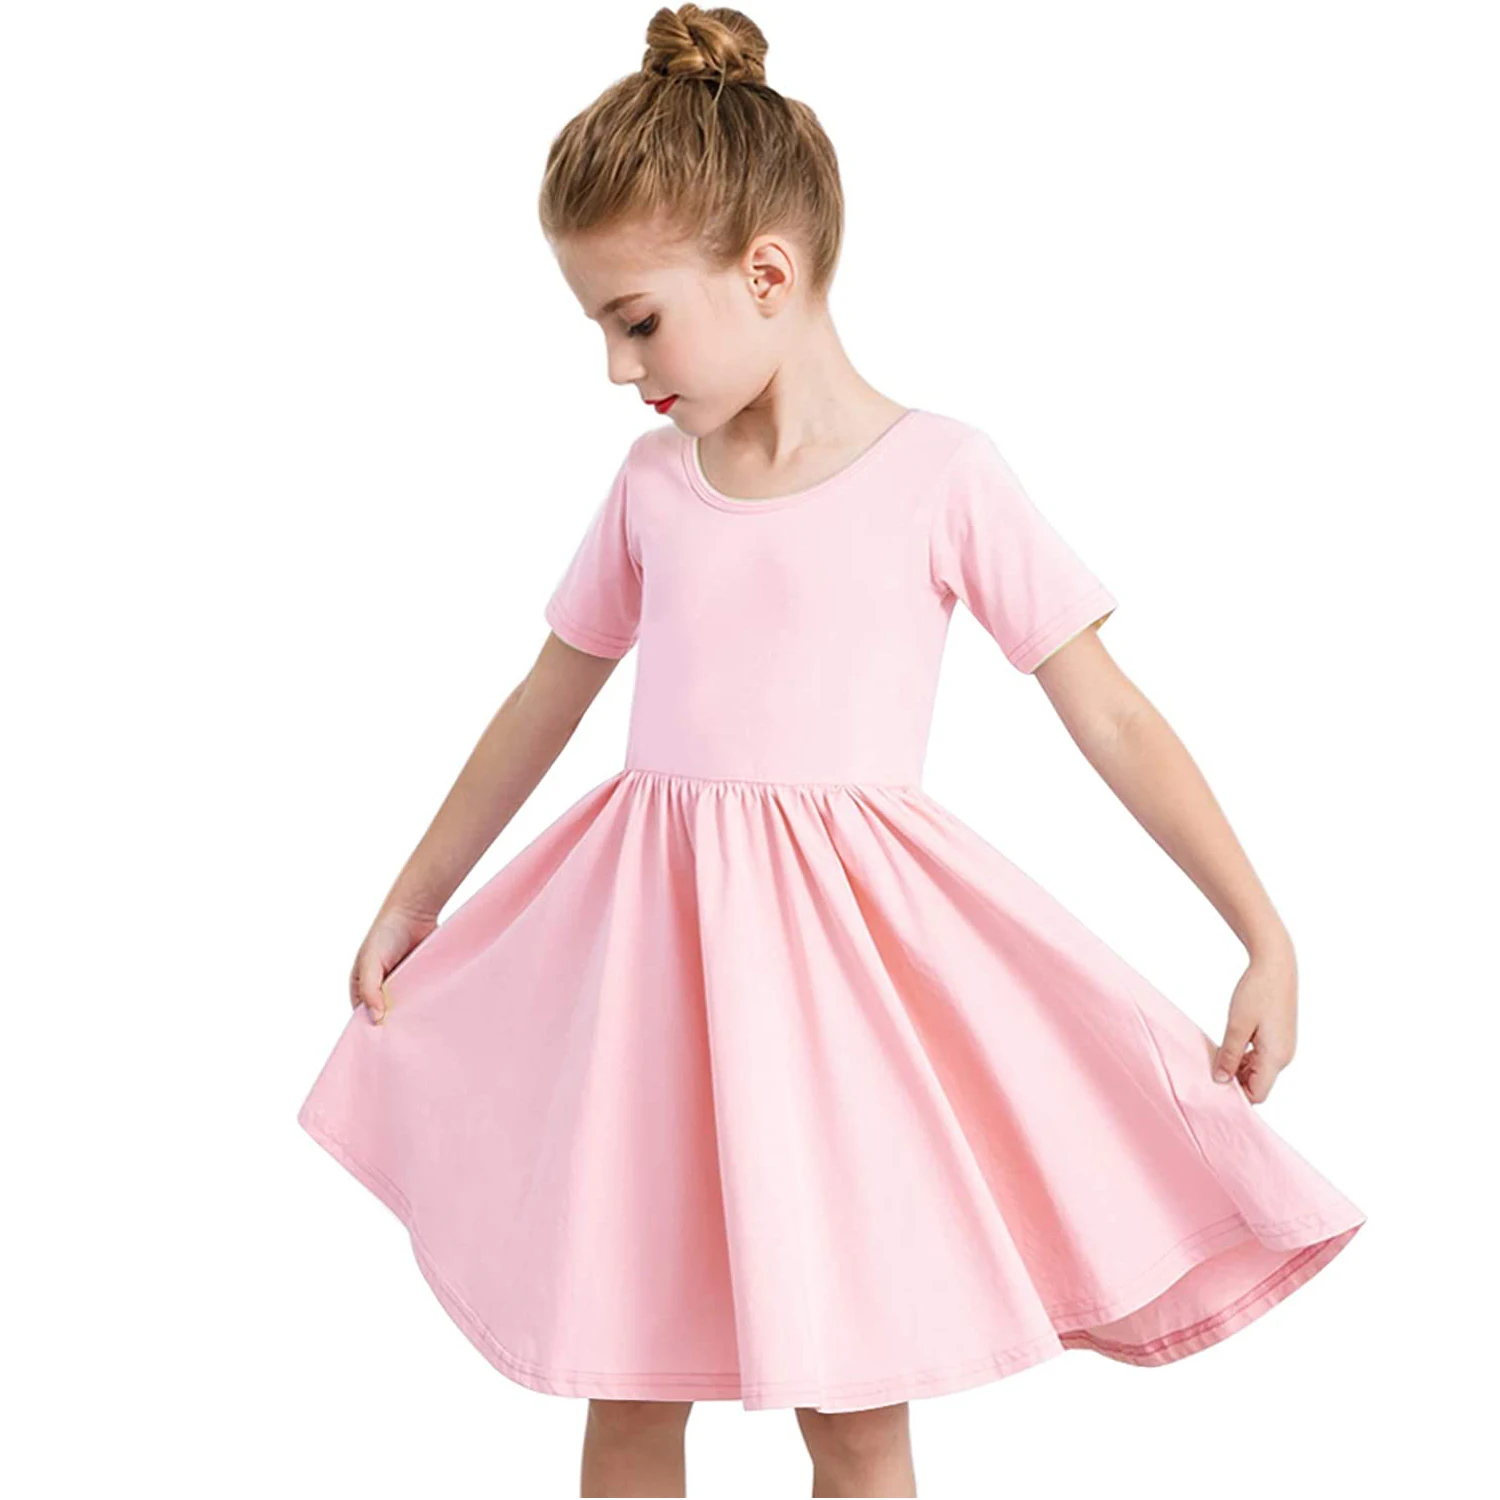 Filles Coton Haut Taille Twirly Robe Patineuse Enfant Casual Parti Robes 